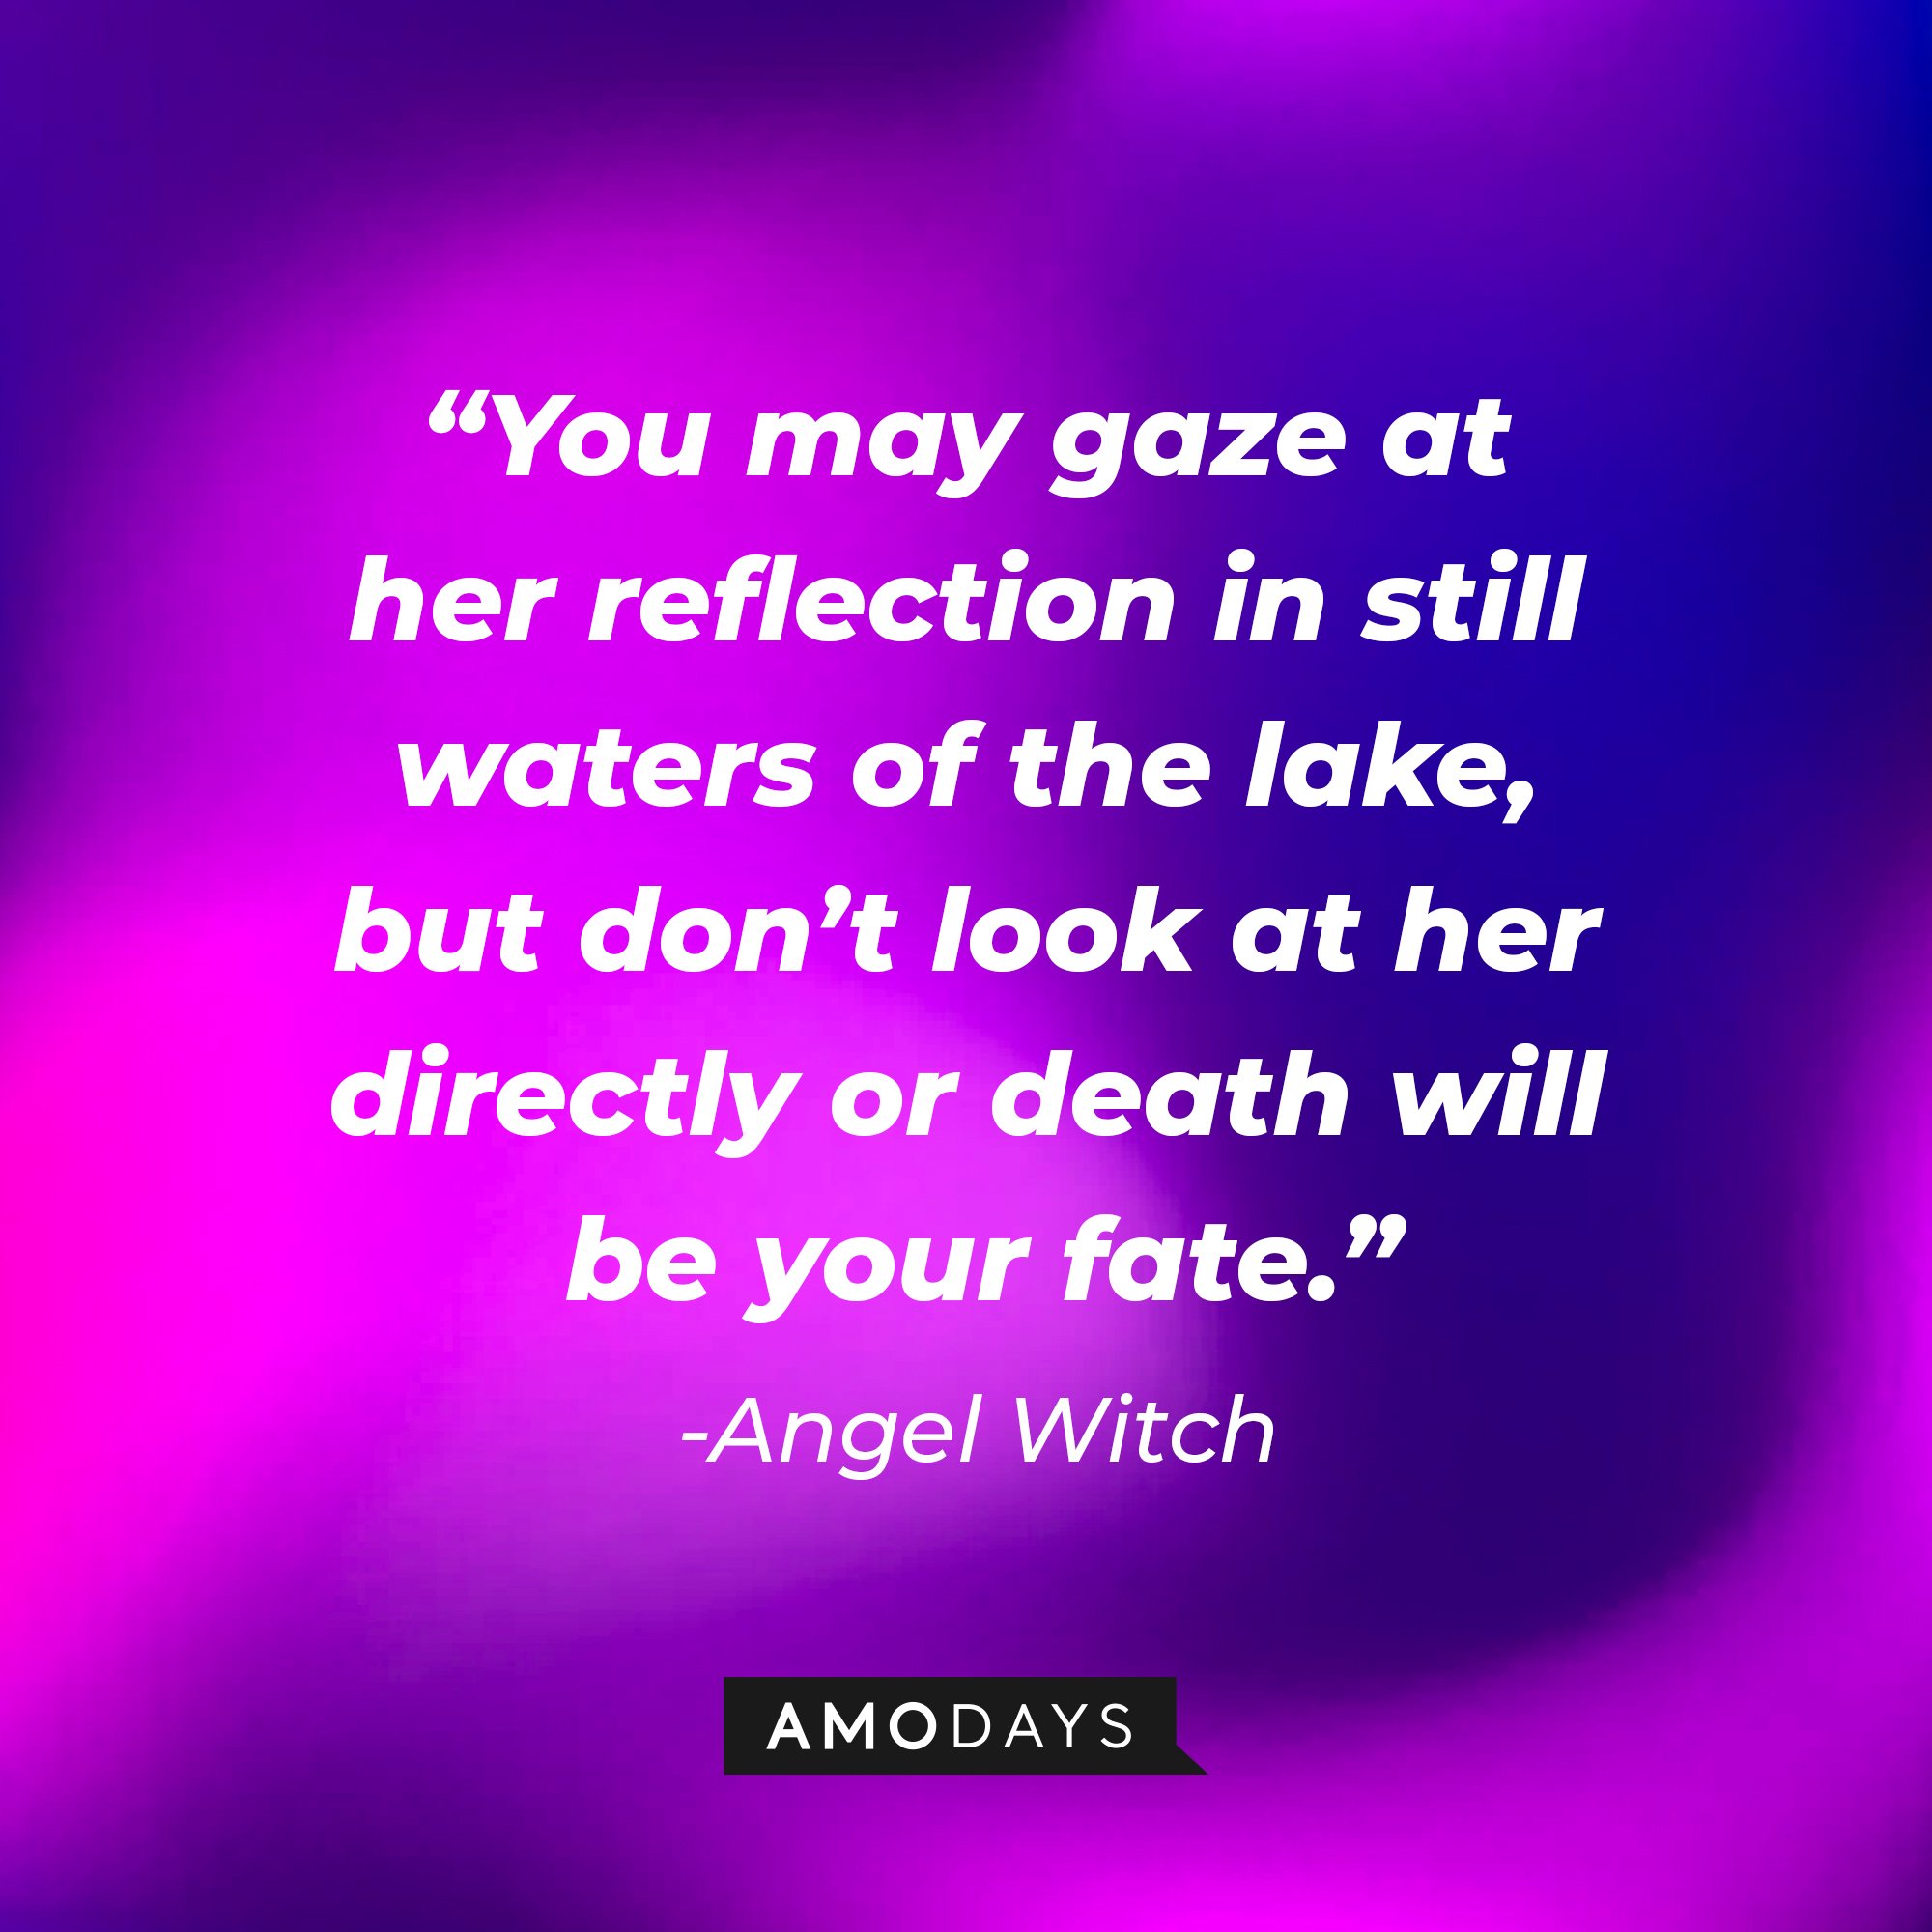 Angel Witch’s quote: "You may gaze at her reflection in still waters of the lake, but don’t look at her directly or death will be your fate.” | Image: AmoDays